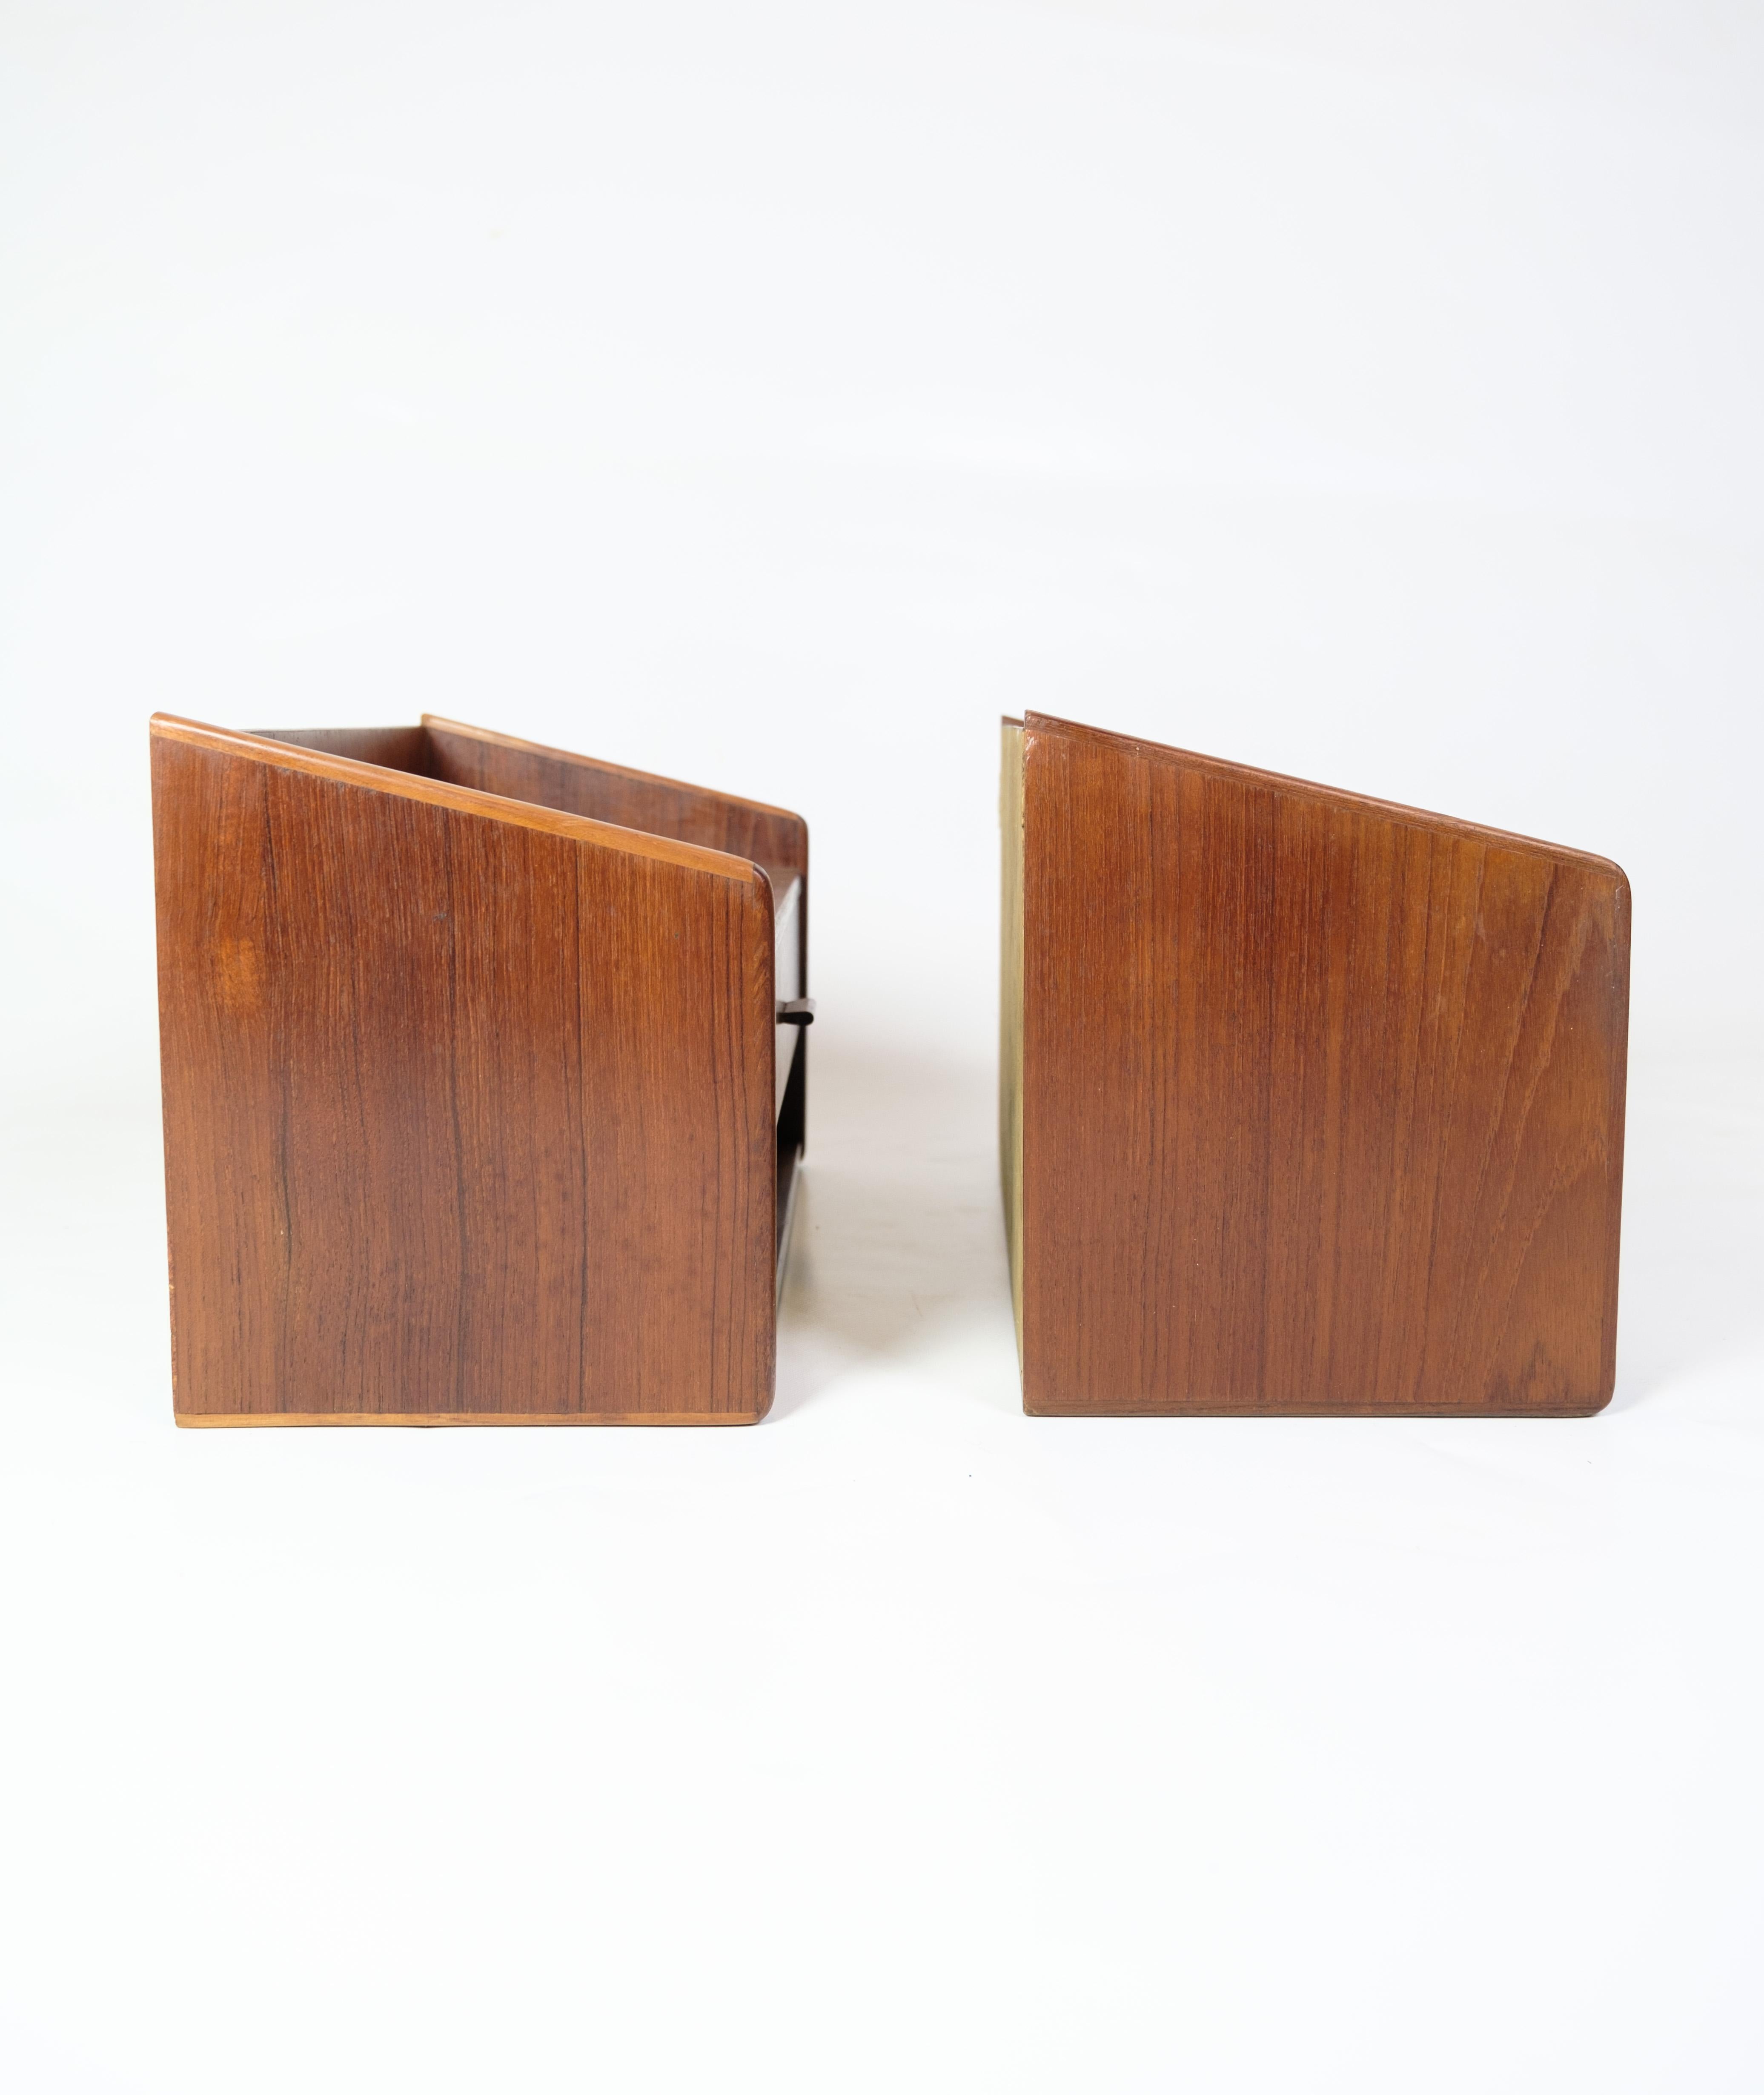 Mid-Century Modern Teak Wall-Mounted Nightstands with Drawers from 1960s. For Sale